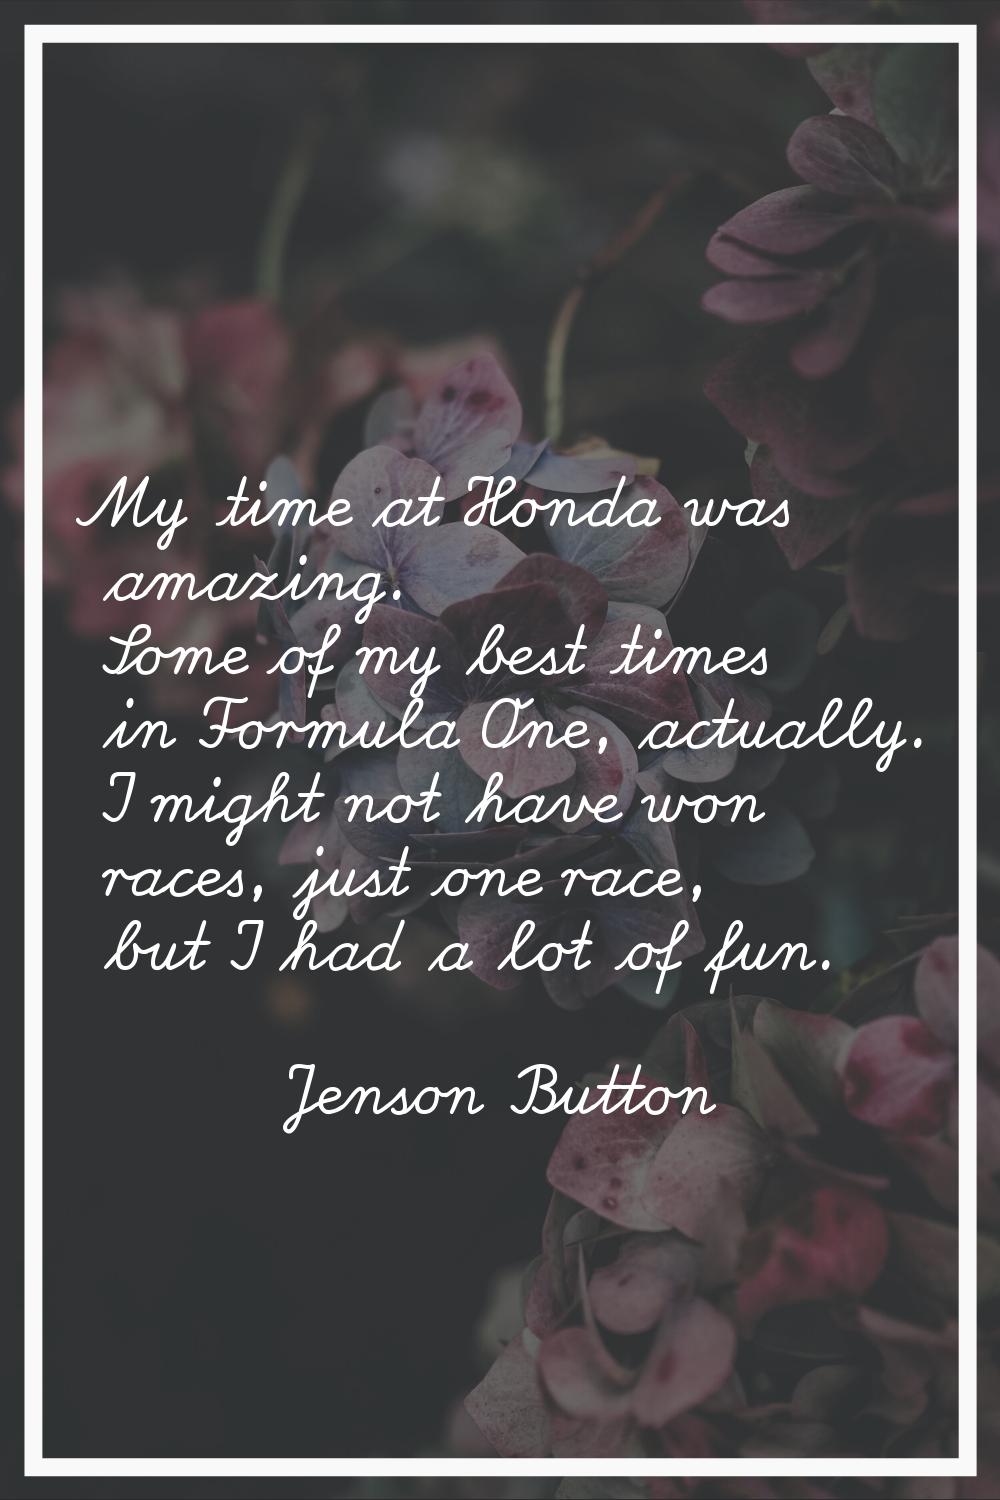 My time at Honda was amazing. Some of my best times in Formula One, actually. I might not have won 